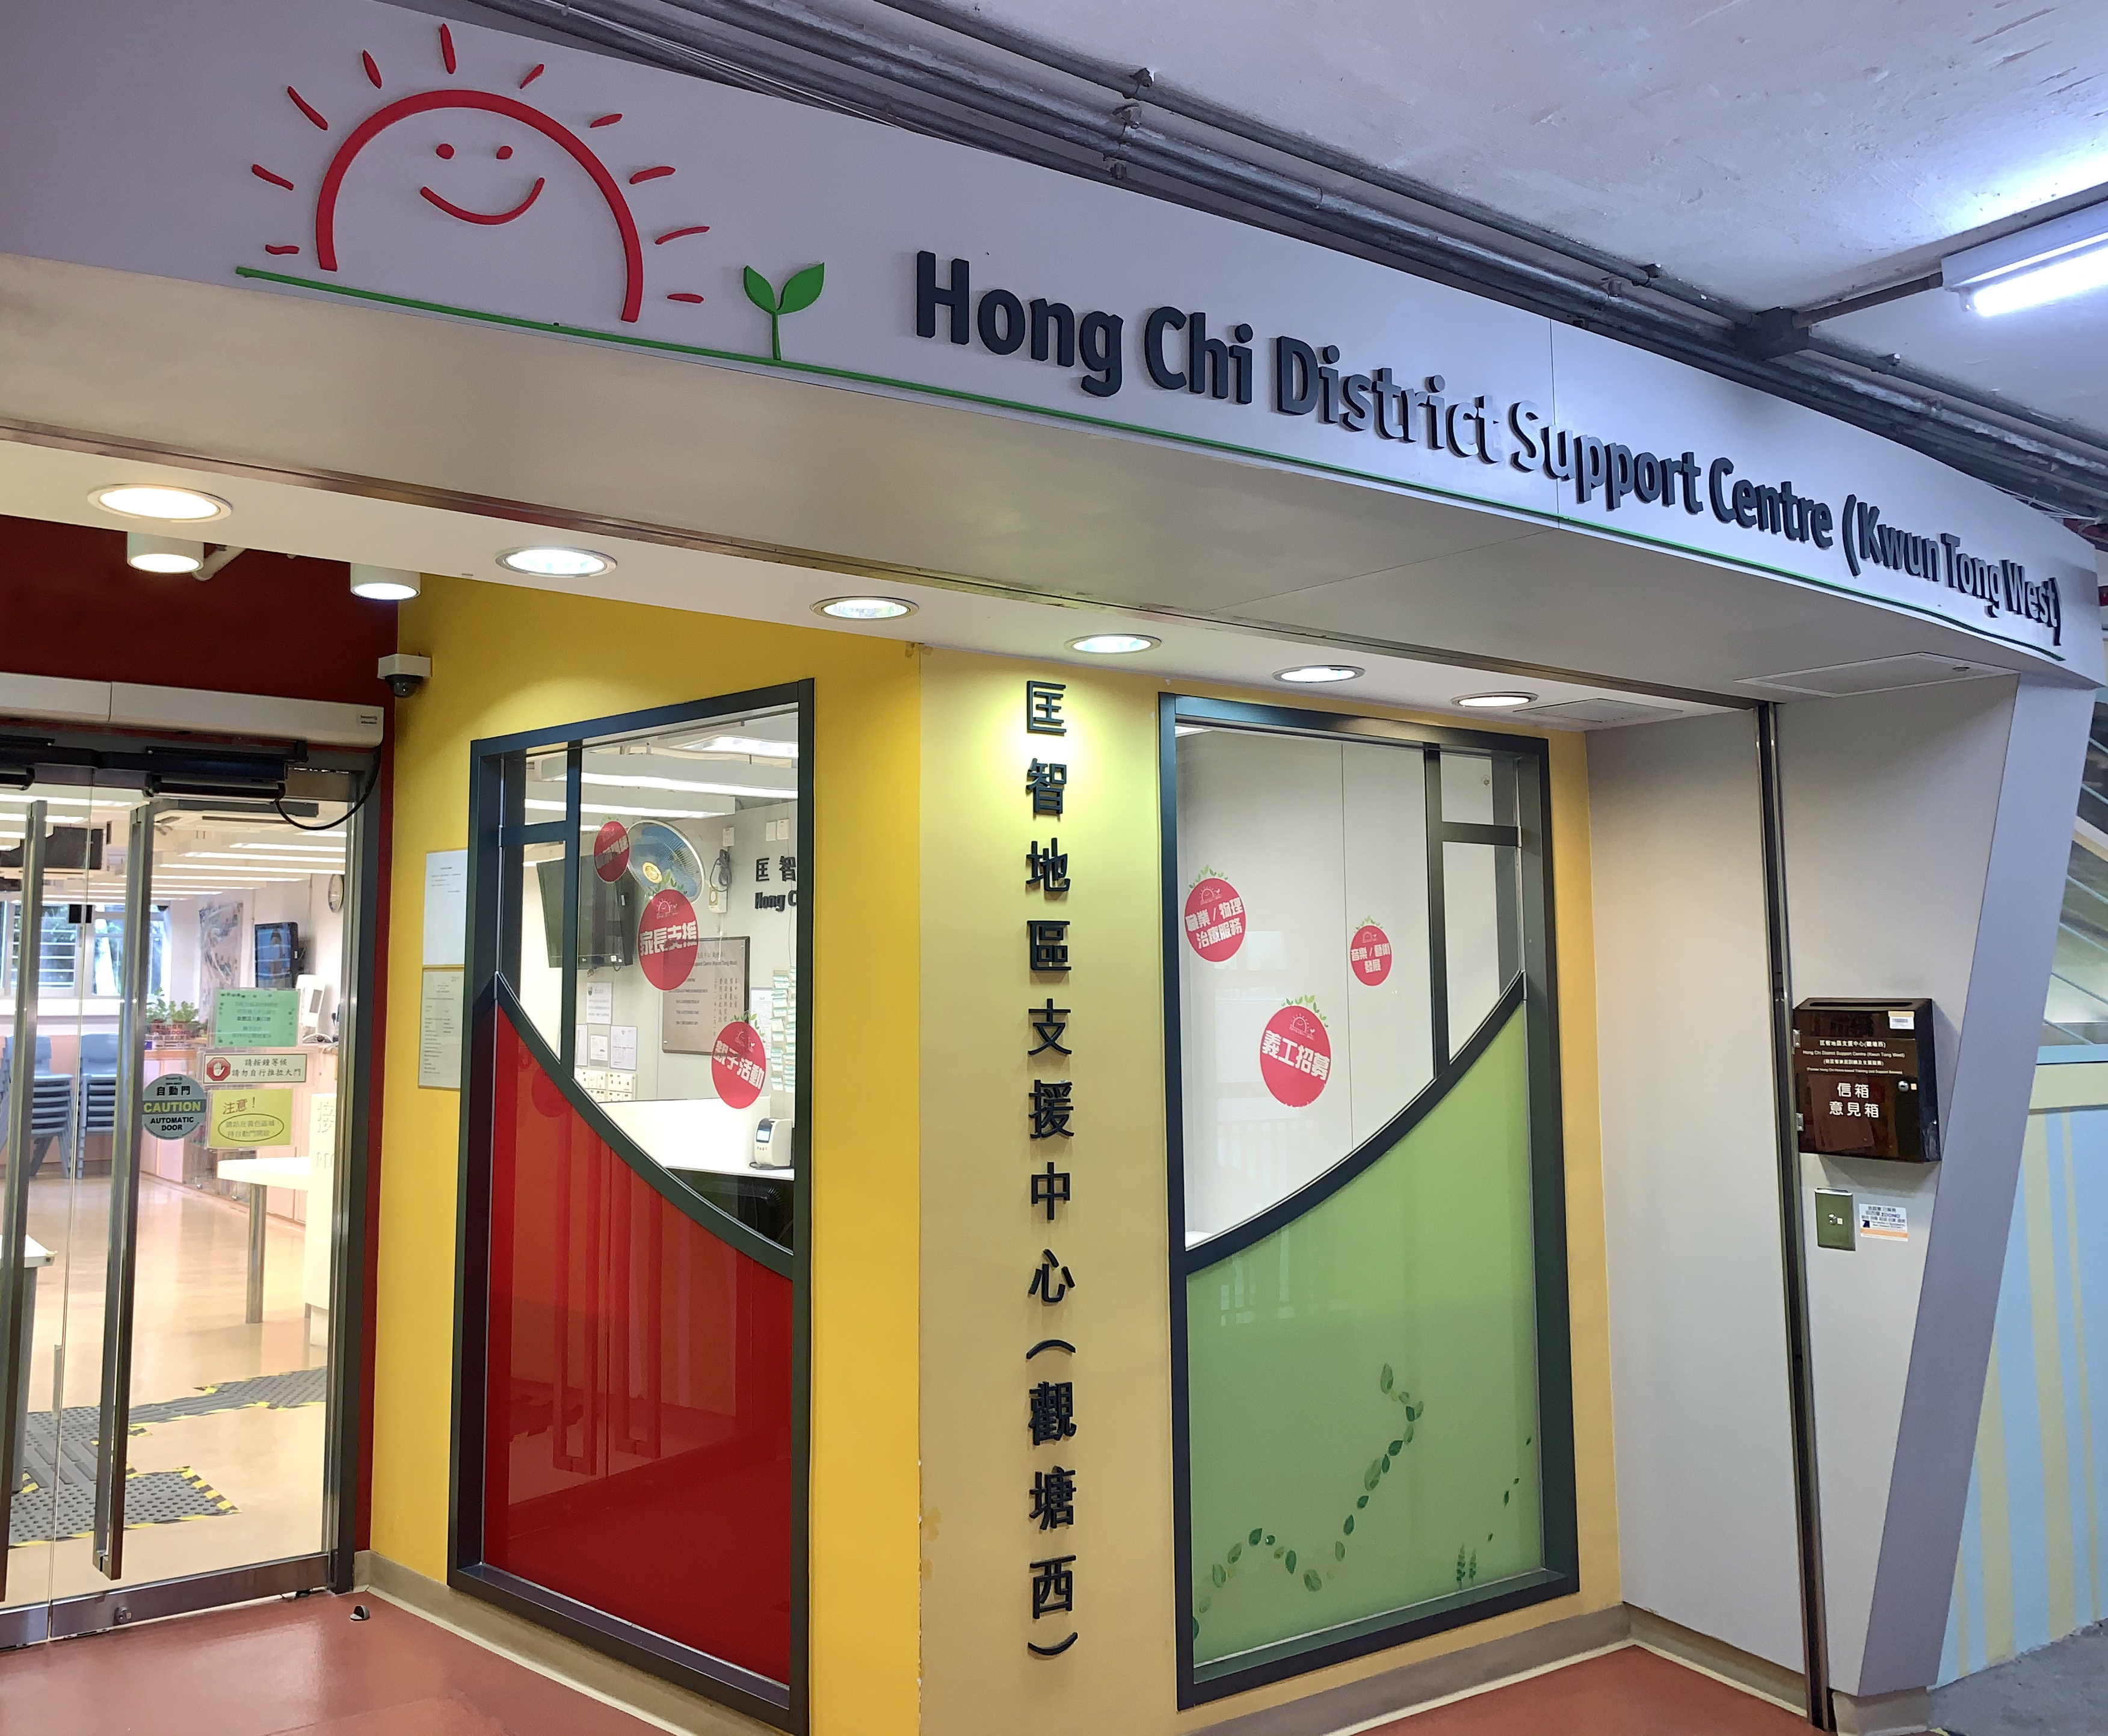 Hong Chi District Support Centre (Kwun Tong West)